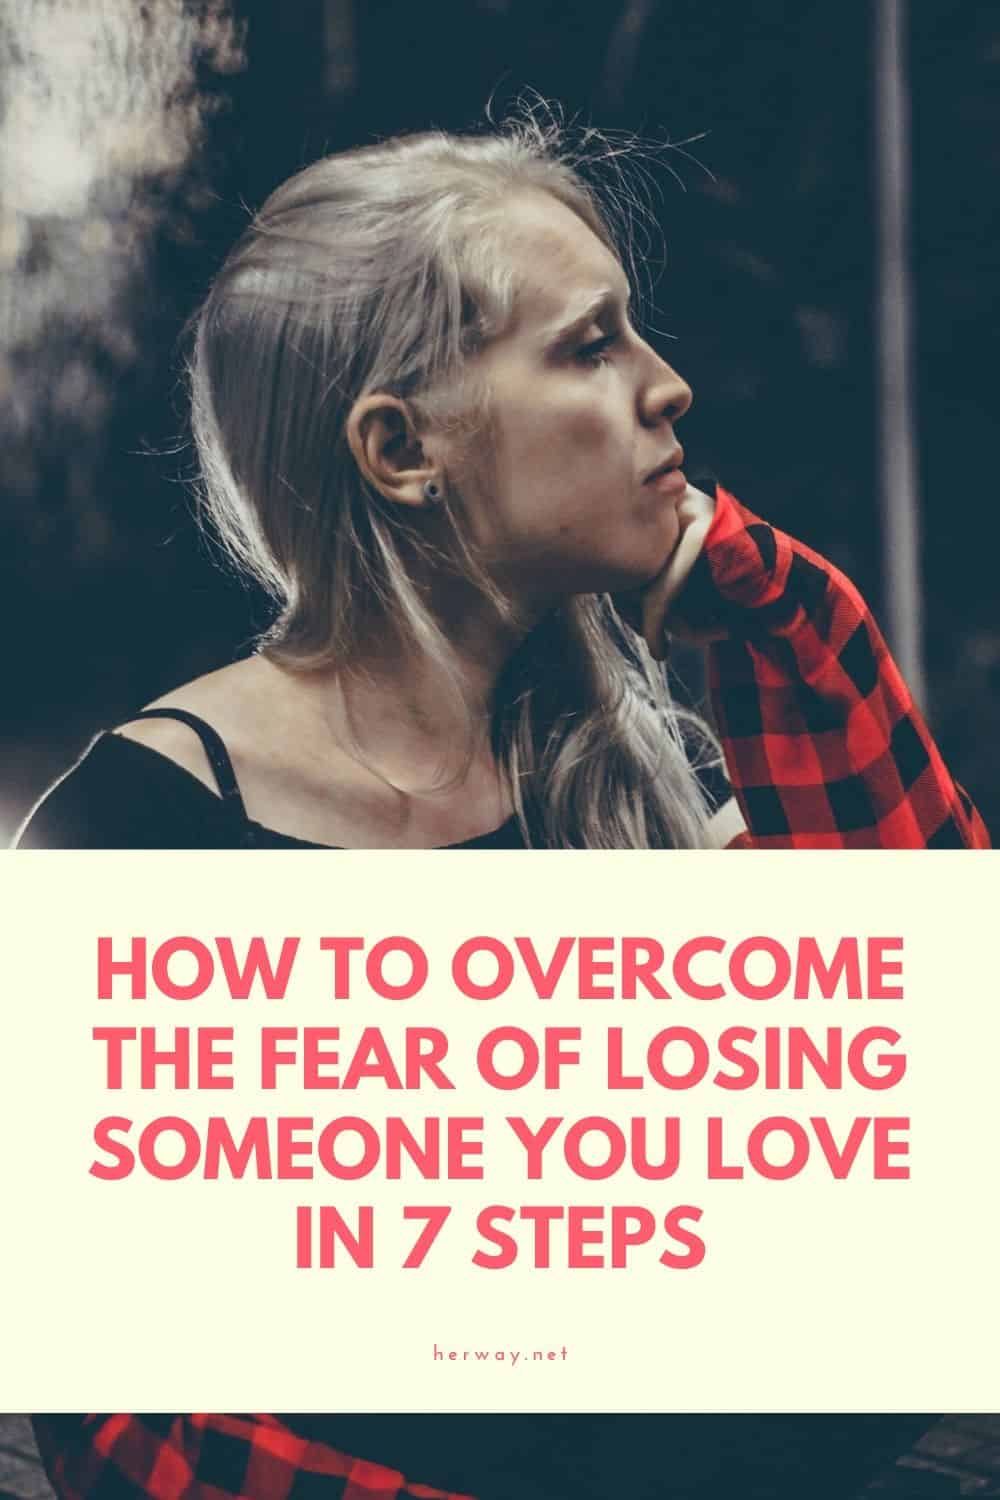 How To Overcome The Fear Of Losing Someone You Love In 7 Steps